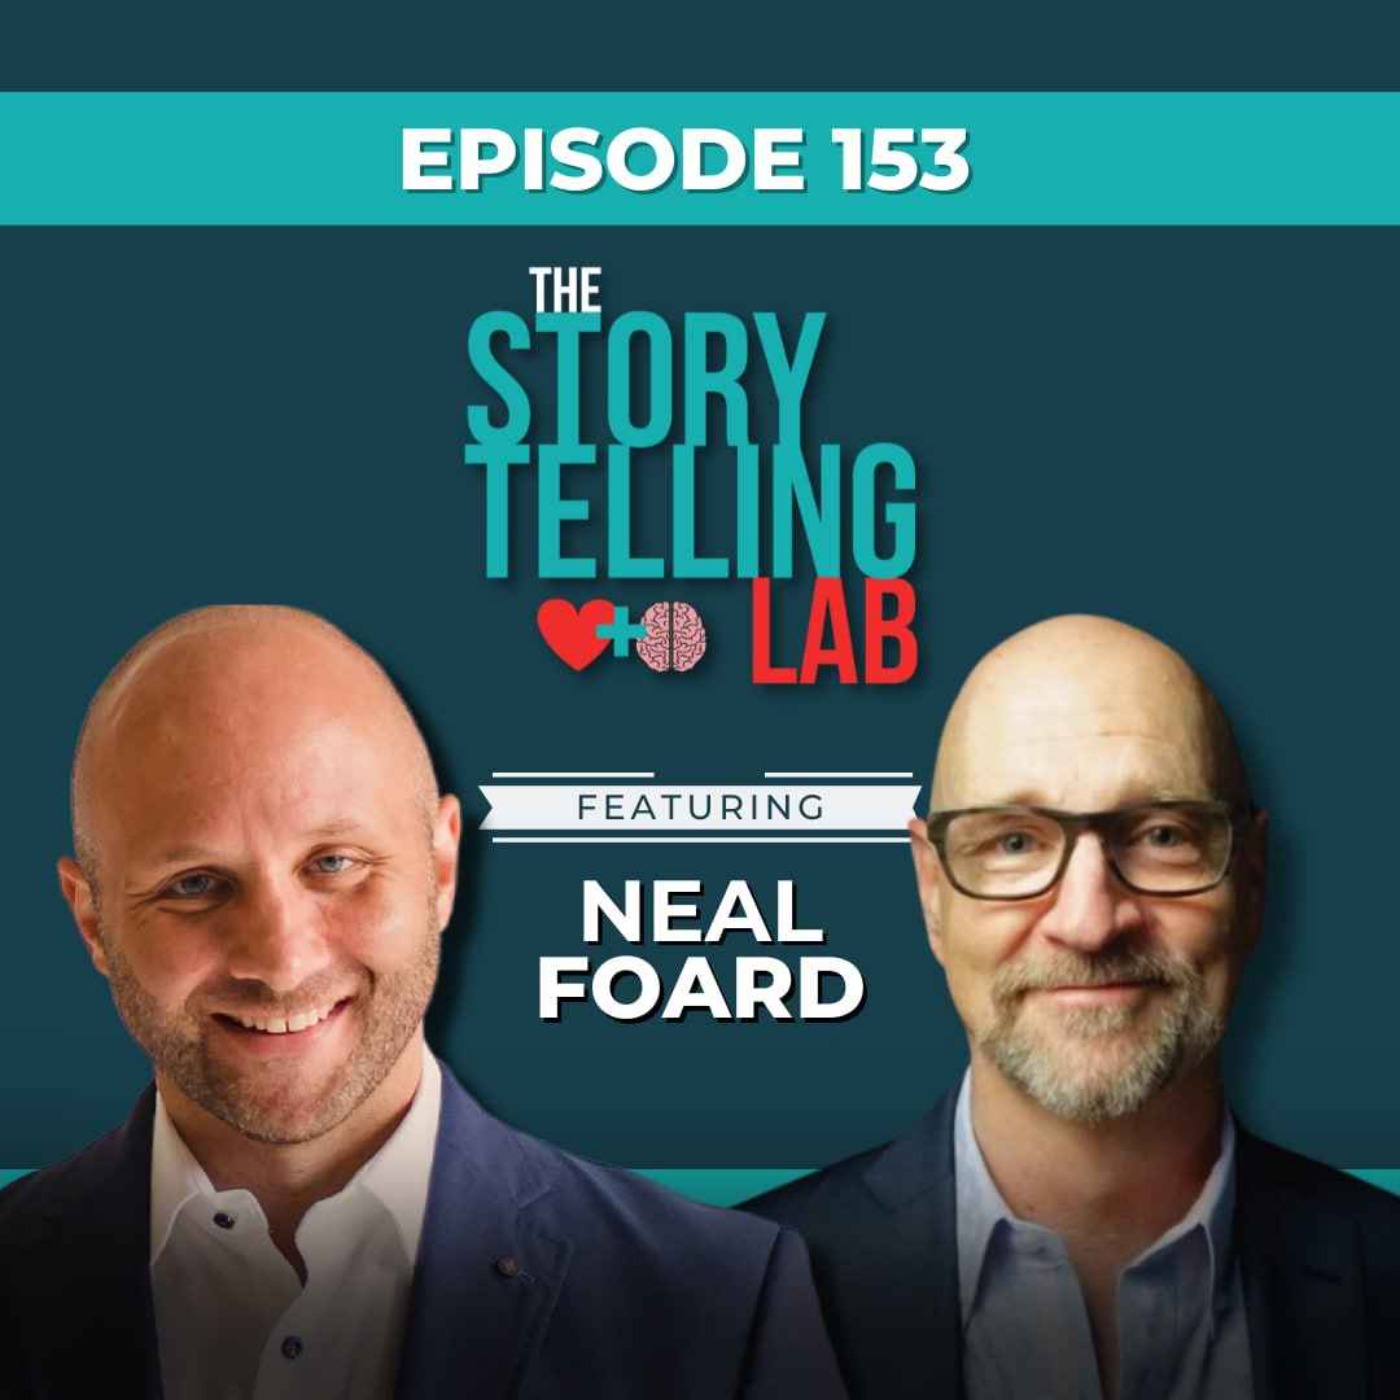 Possess the Power of a Master Storyteller and Create Genuine Connections with Neal Foard